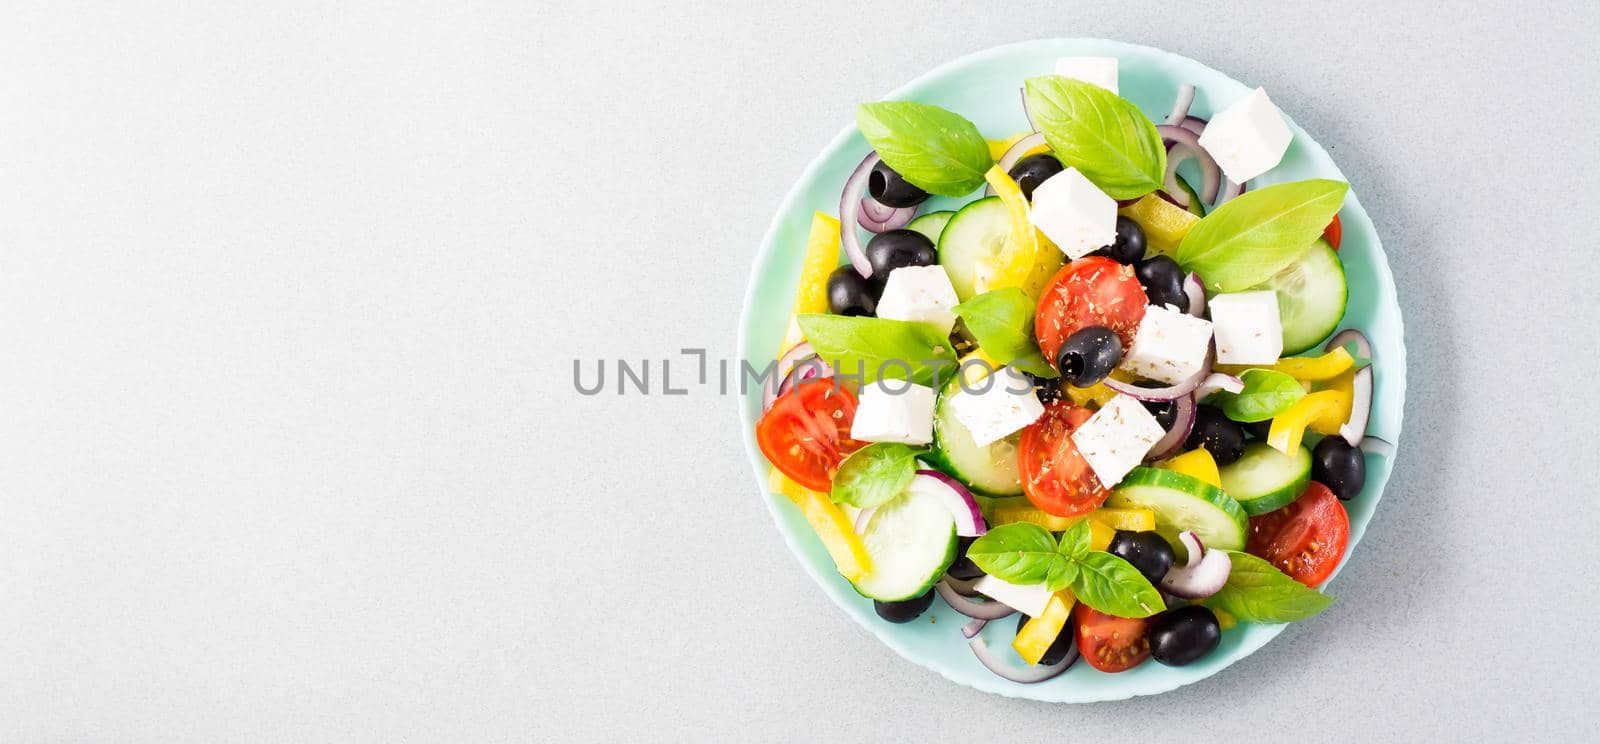 Fresh homemade greek salad with basil leaves on a plate on the table. Domestic life. Top view. Copy space. Web banner by Aleruana